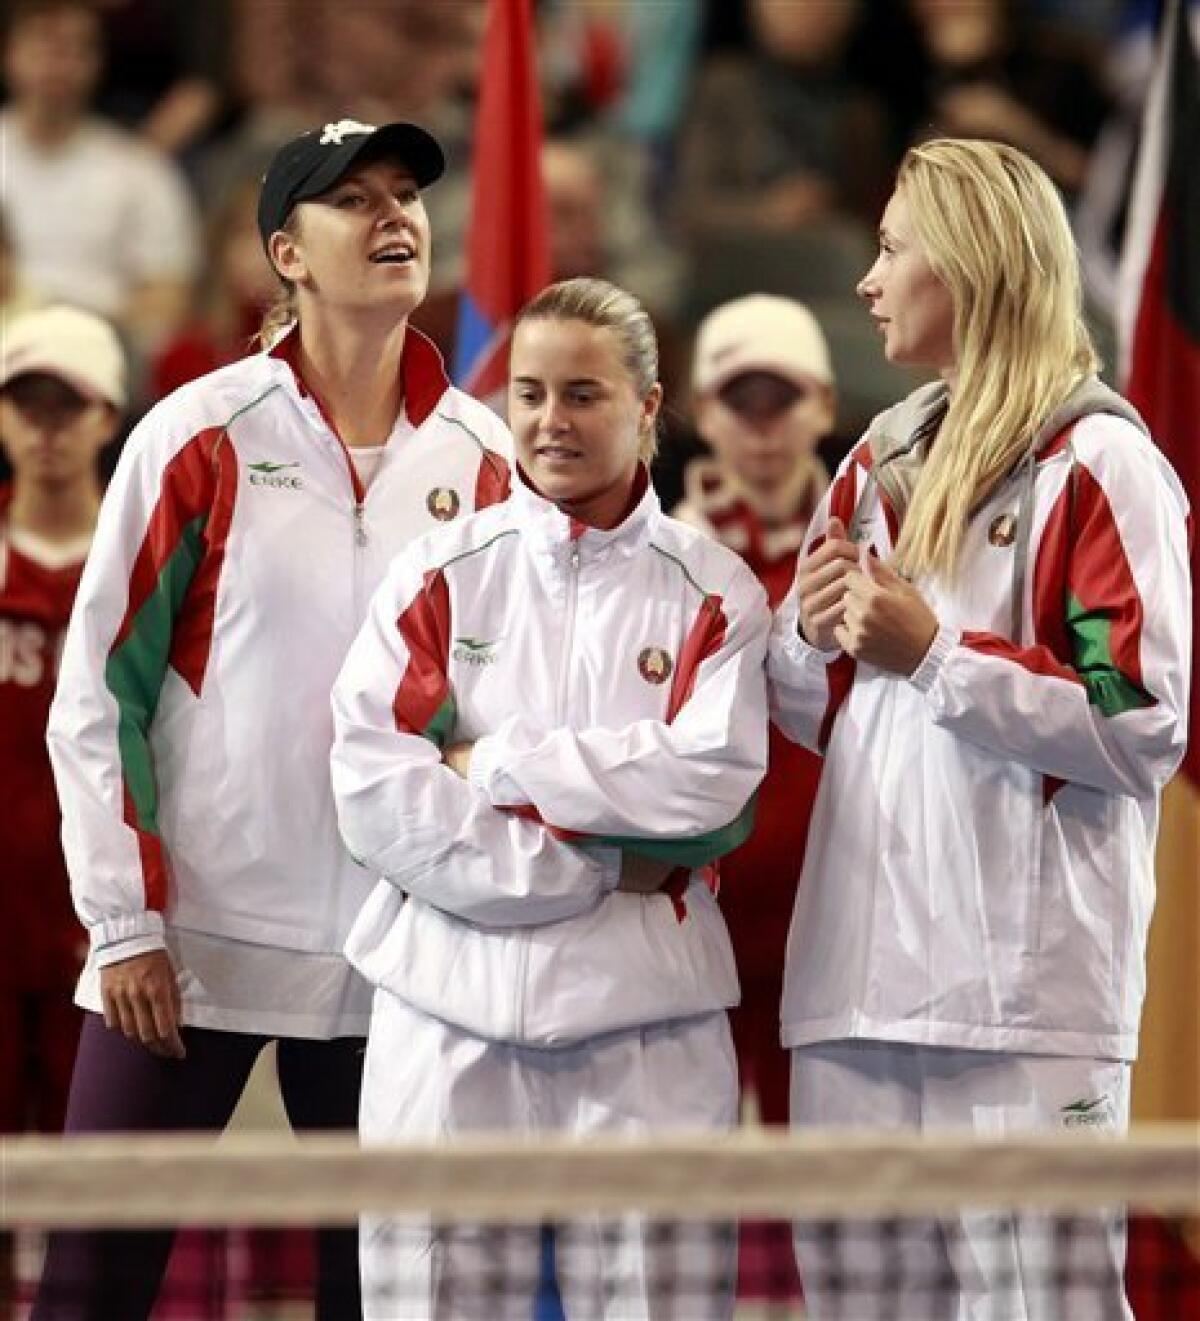 Victoria Azarenka, left, Anastasia Yakimova, center, and Olga Govortsova, all of Belarus, stand together before first-round Fed Cup tennis matches against the United States, in Worcester, Mass., Sunday, Feb. 5, 2012. Azarenka is the world's top ranked player. (AP Photo/Steven Senne)